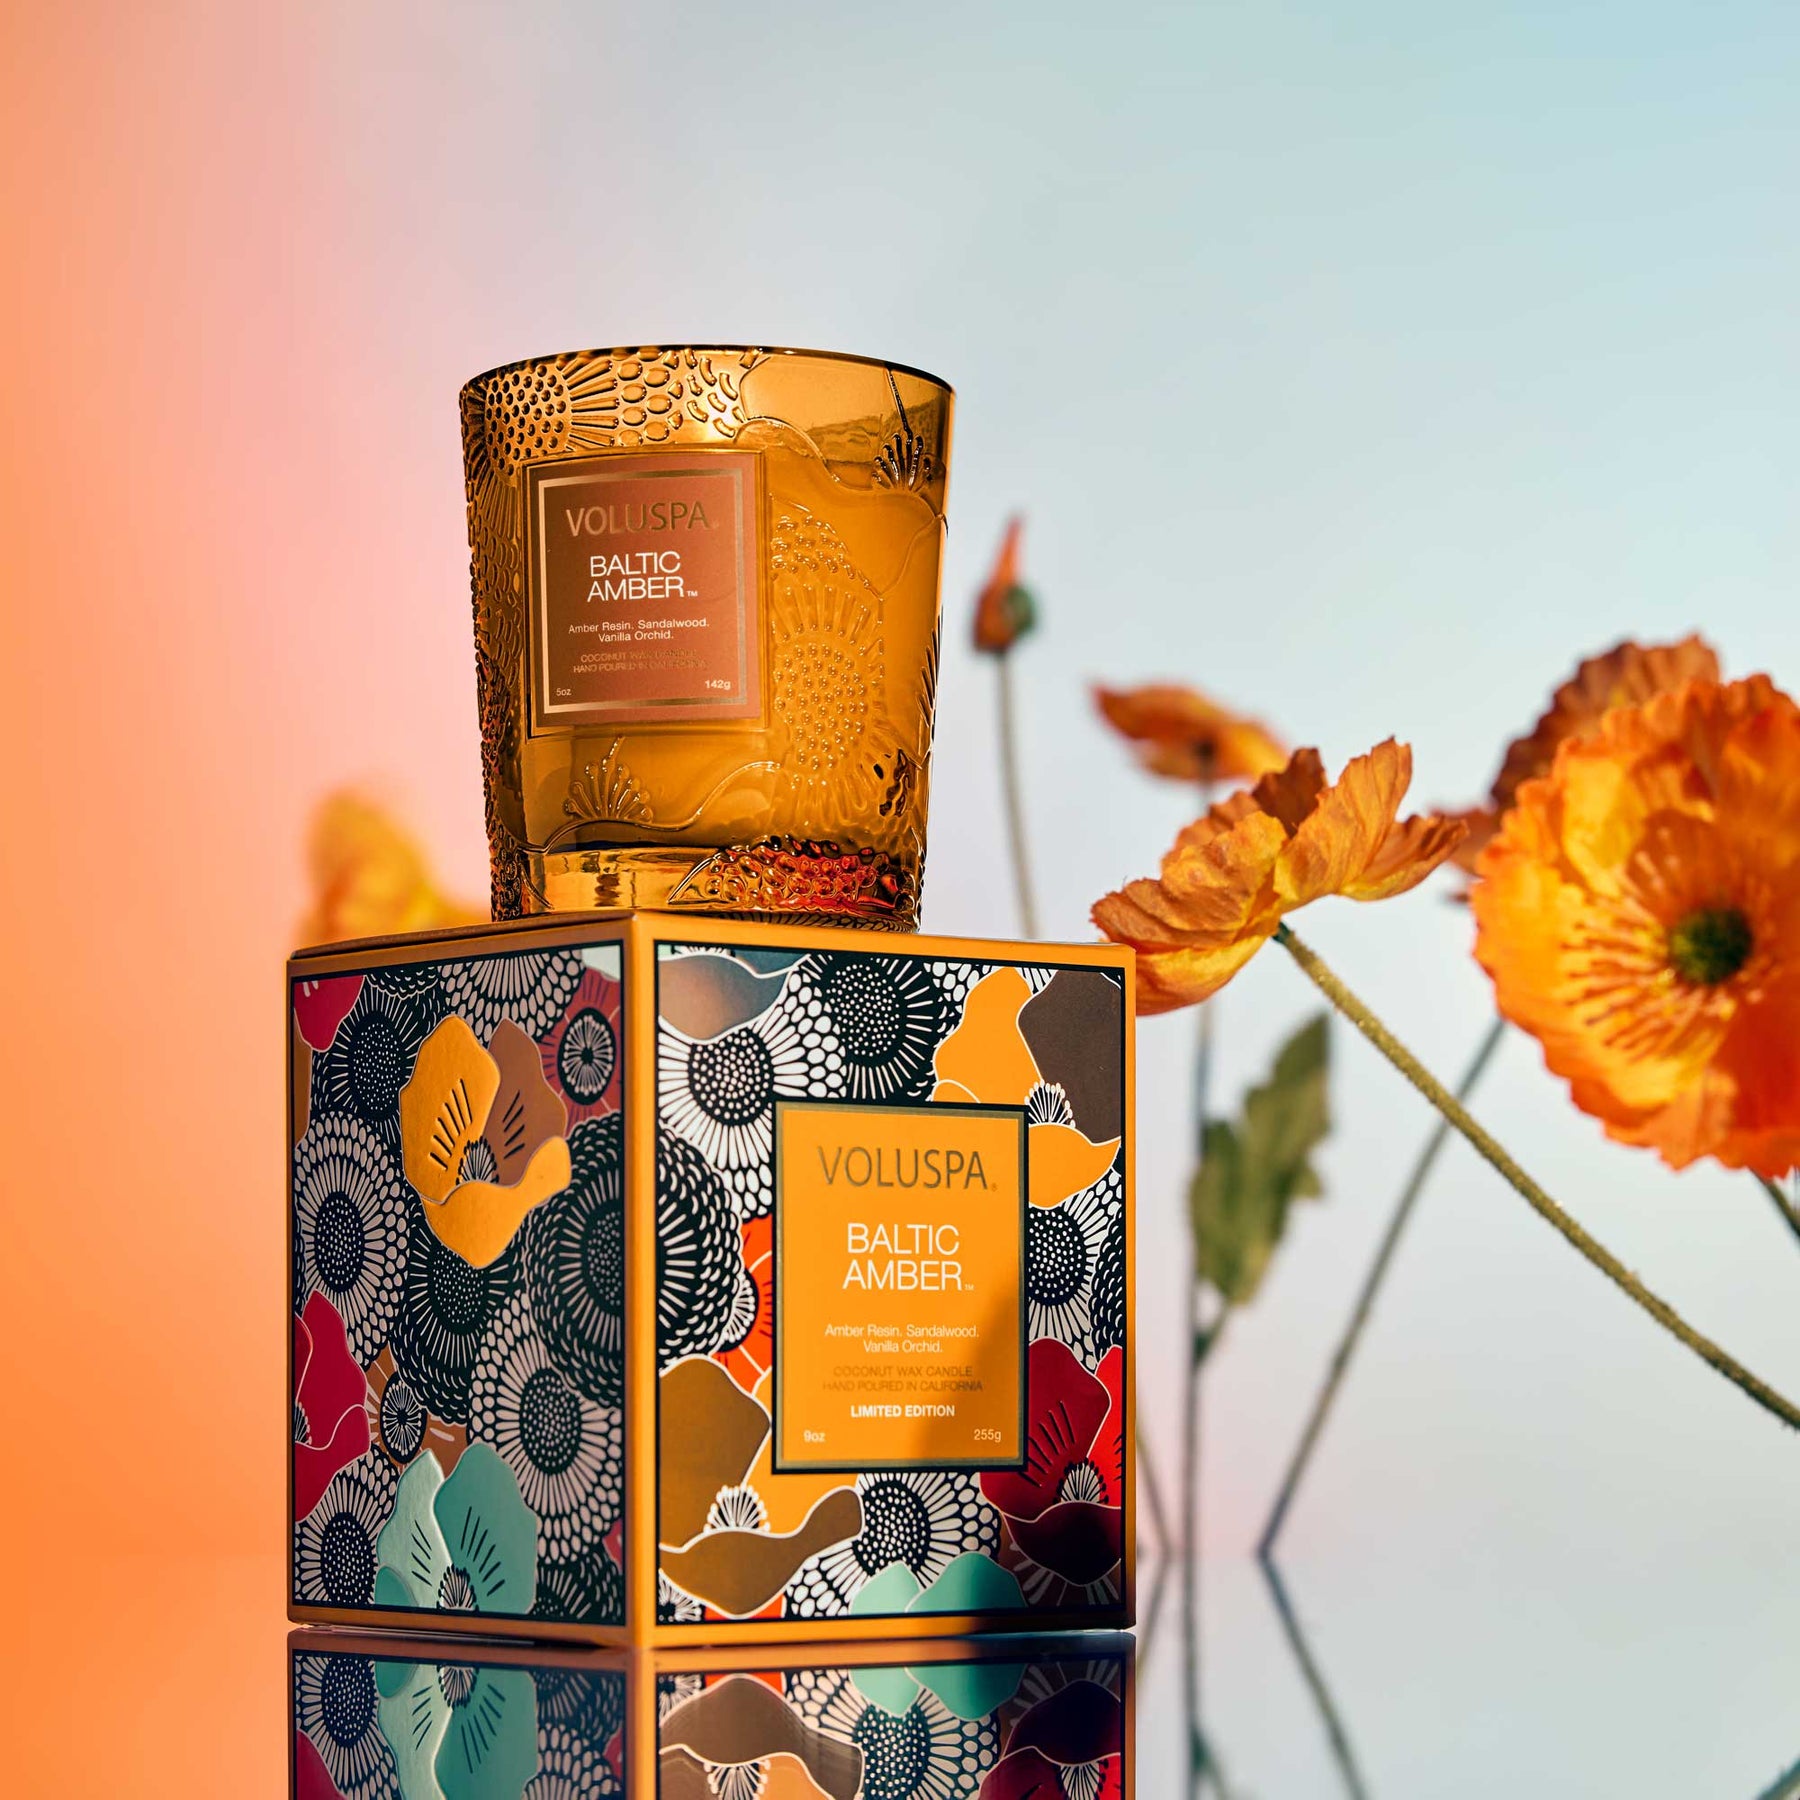 XXVe anniversaire Baltic Amber - Classic Candle